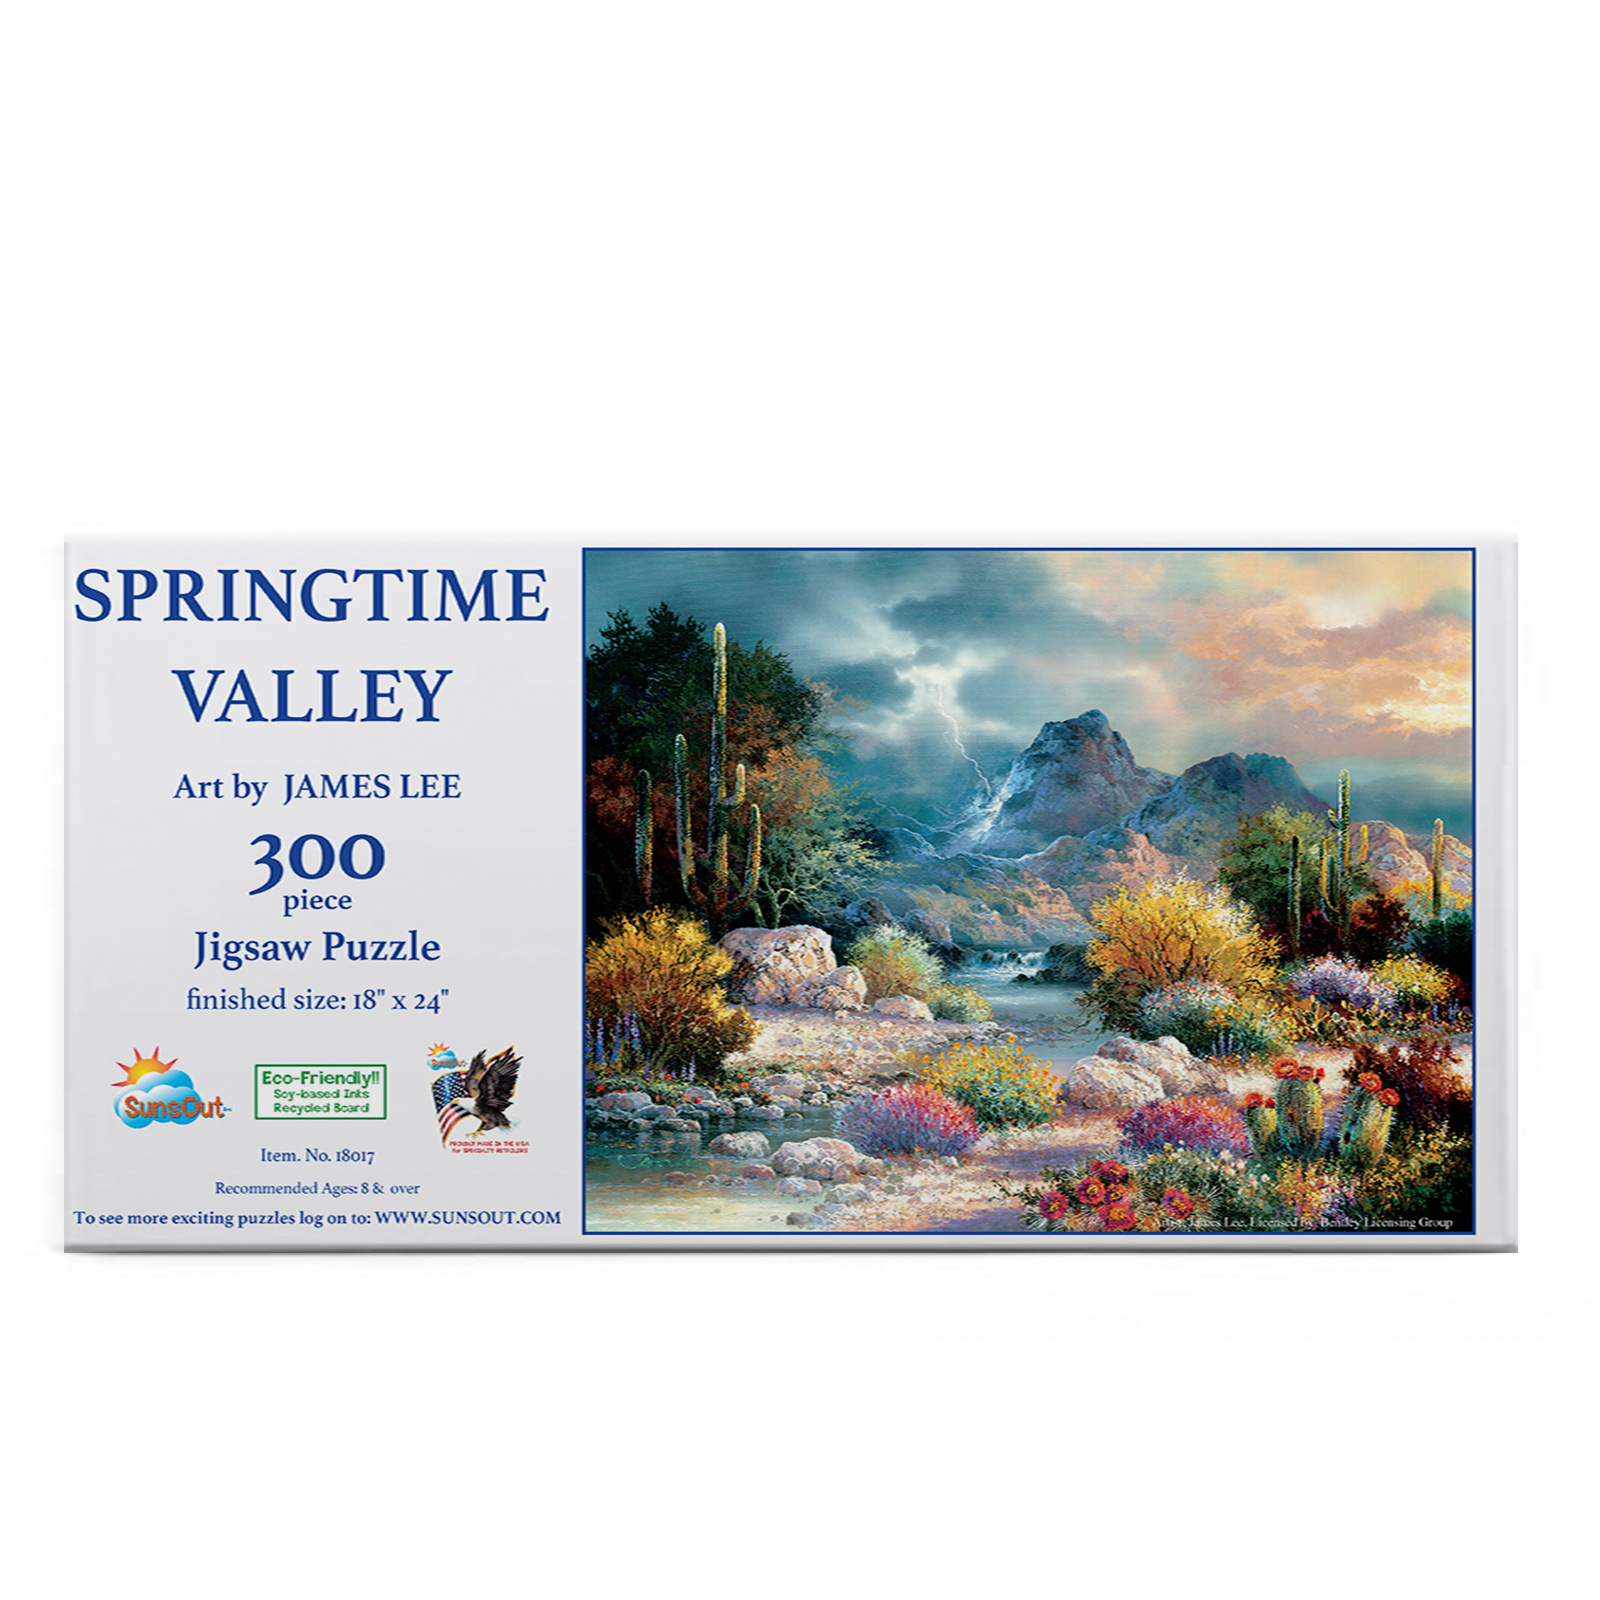 SUNSOUT INC - Springtime Valley - 300 pc Jigsaw Puzzle by Artist: James Lee - Finished Size 18" x 24" - MPN# 18017 - image 3 of 5